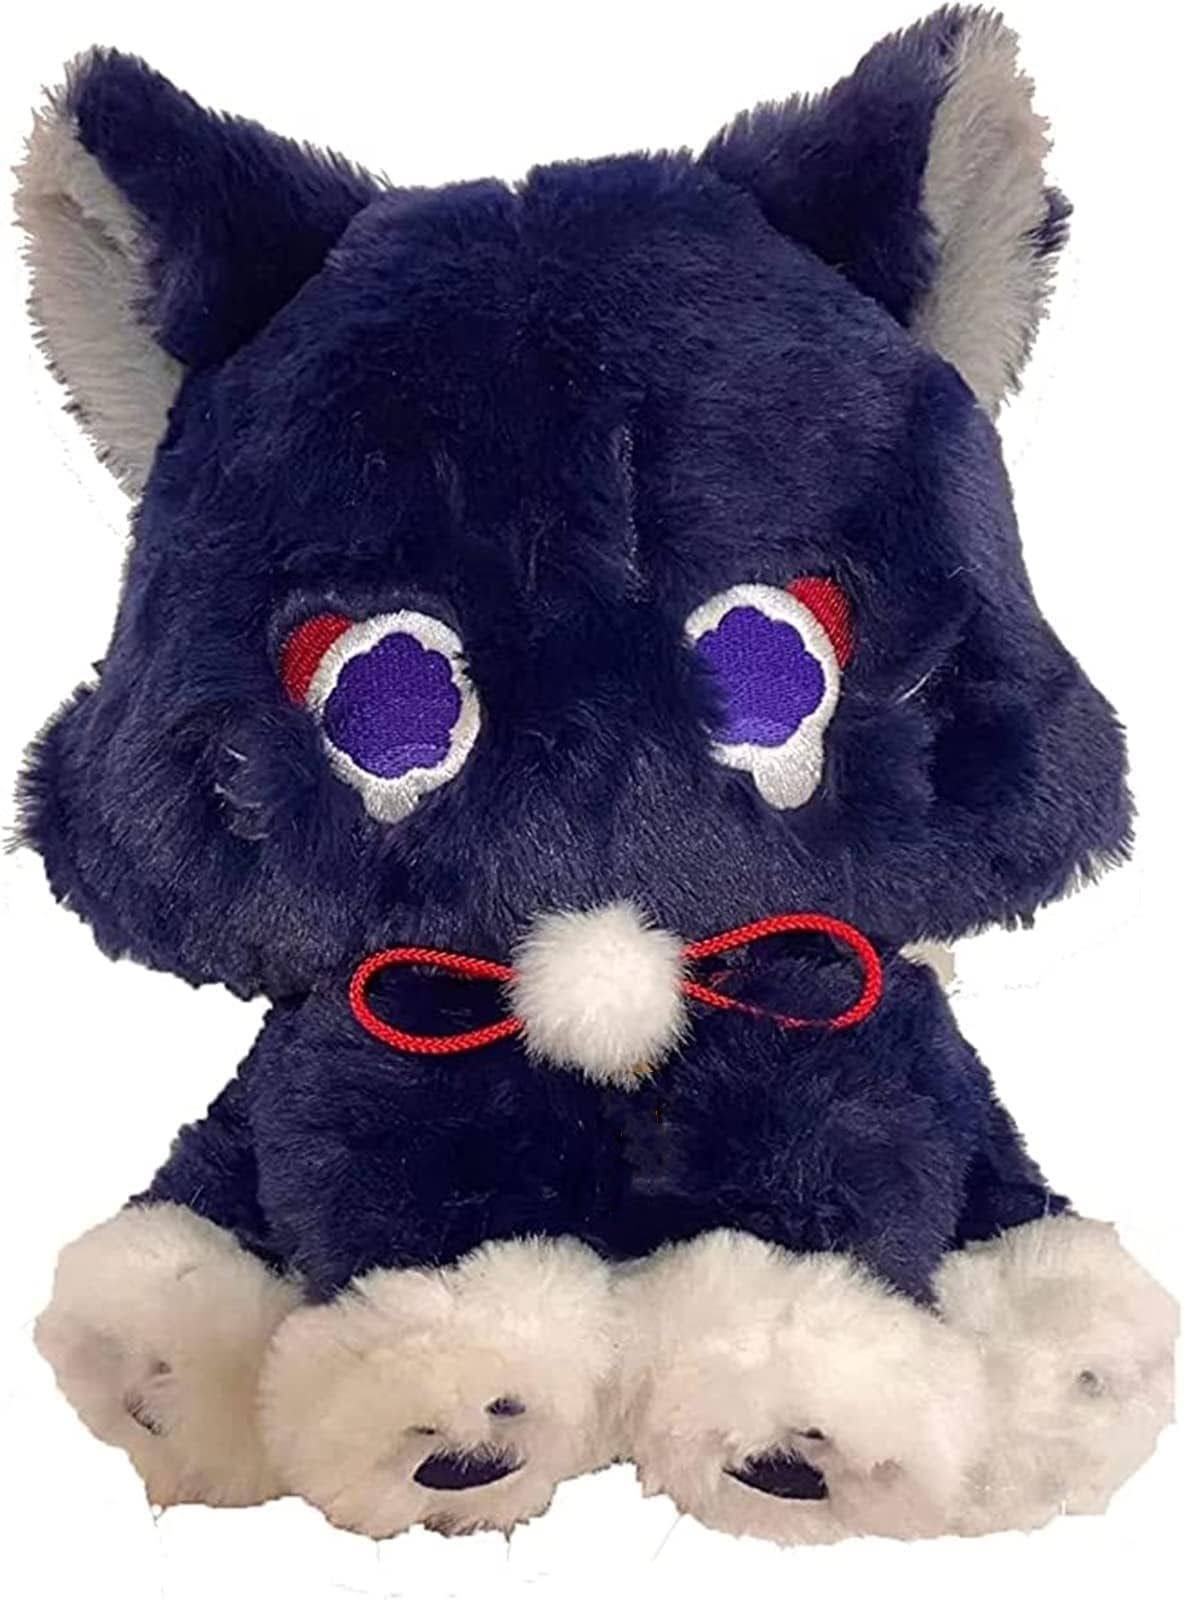 Genshin Impact Wanderer Cat Plush Toy - Soft Stuffed Gift for Game Fans | Image